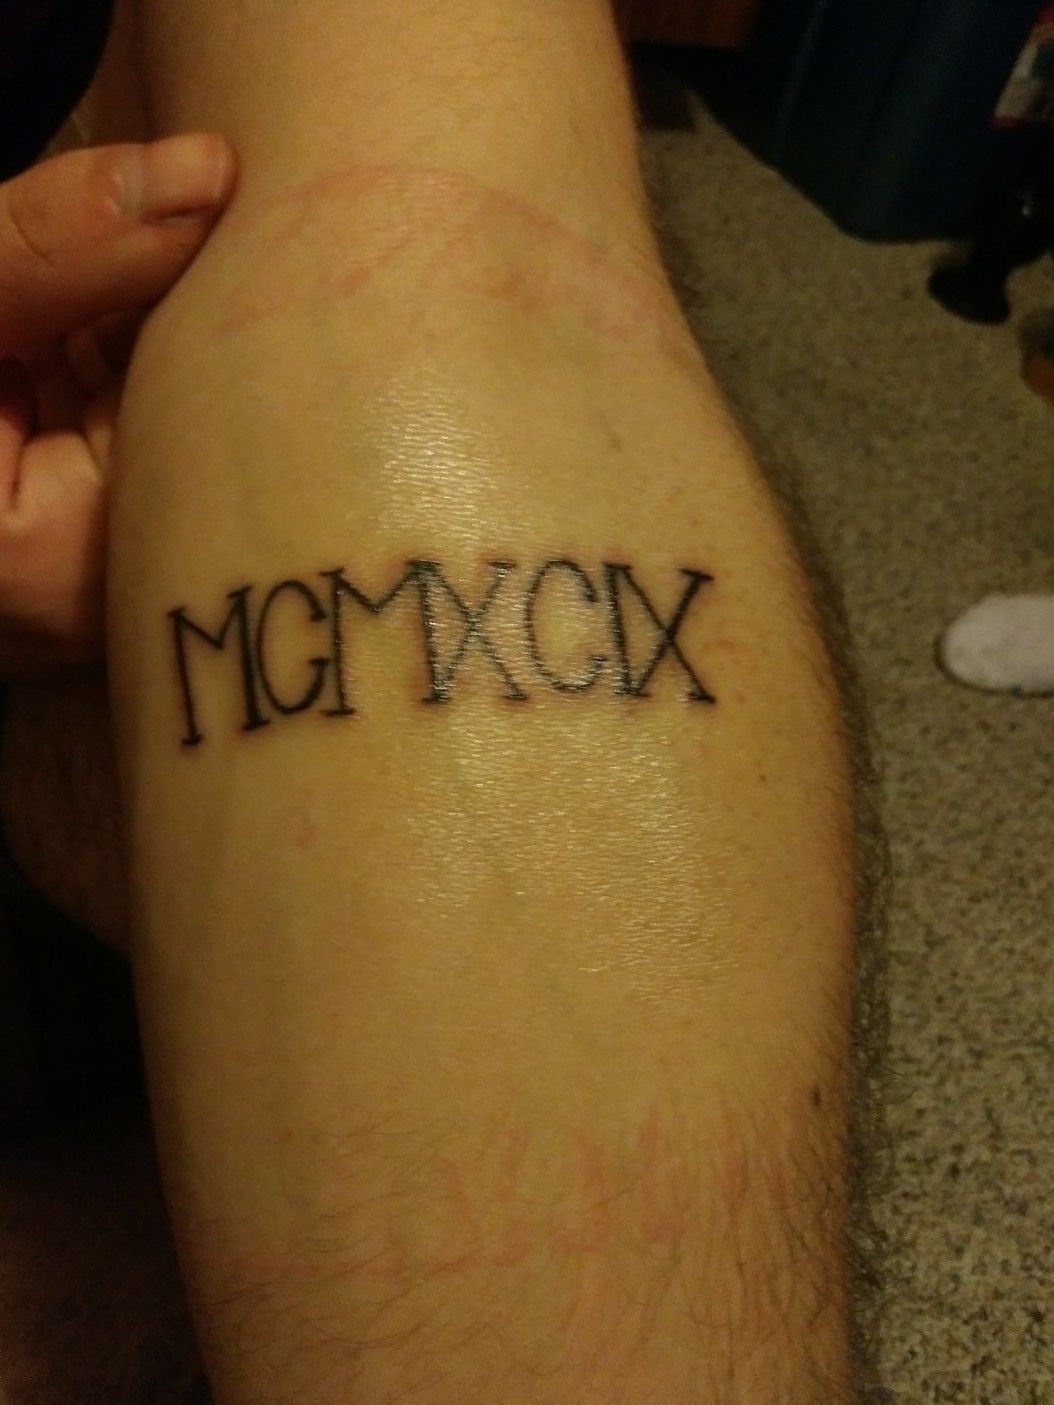 1999 lettering tattoo located on the bicep